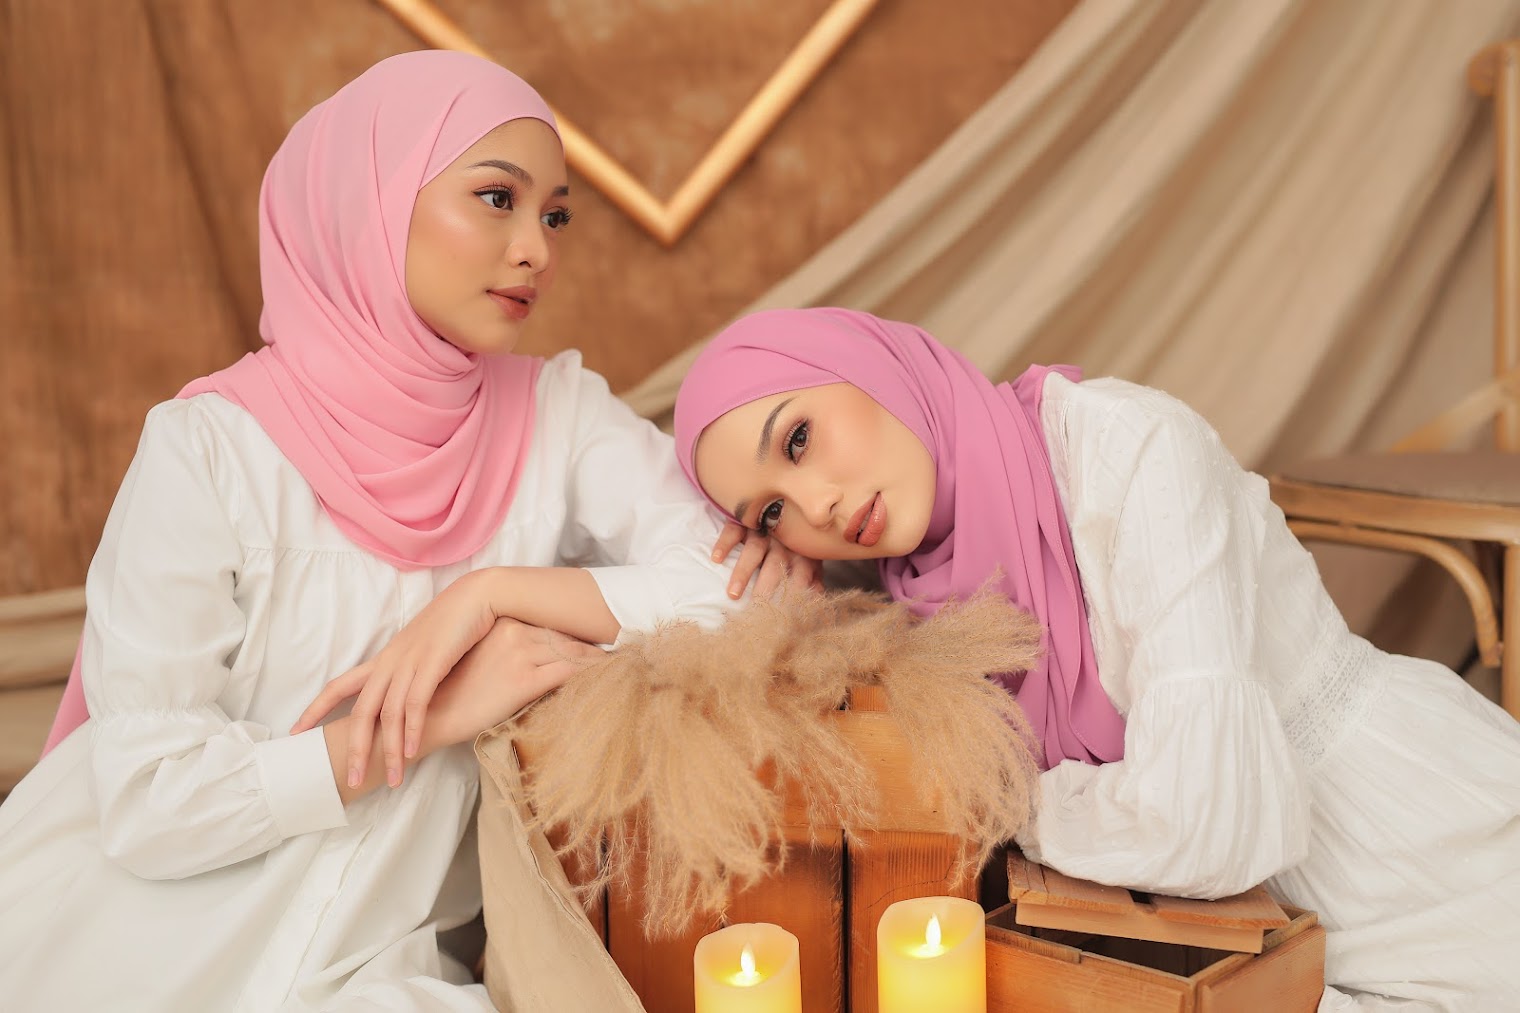 Modern Trendy Jersey Hijab Scarves From Hijab Loft - Ships from the US